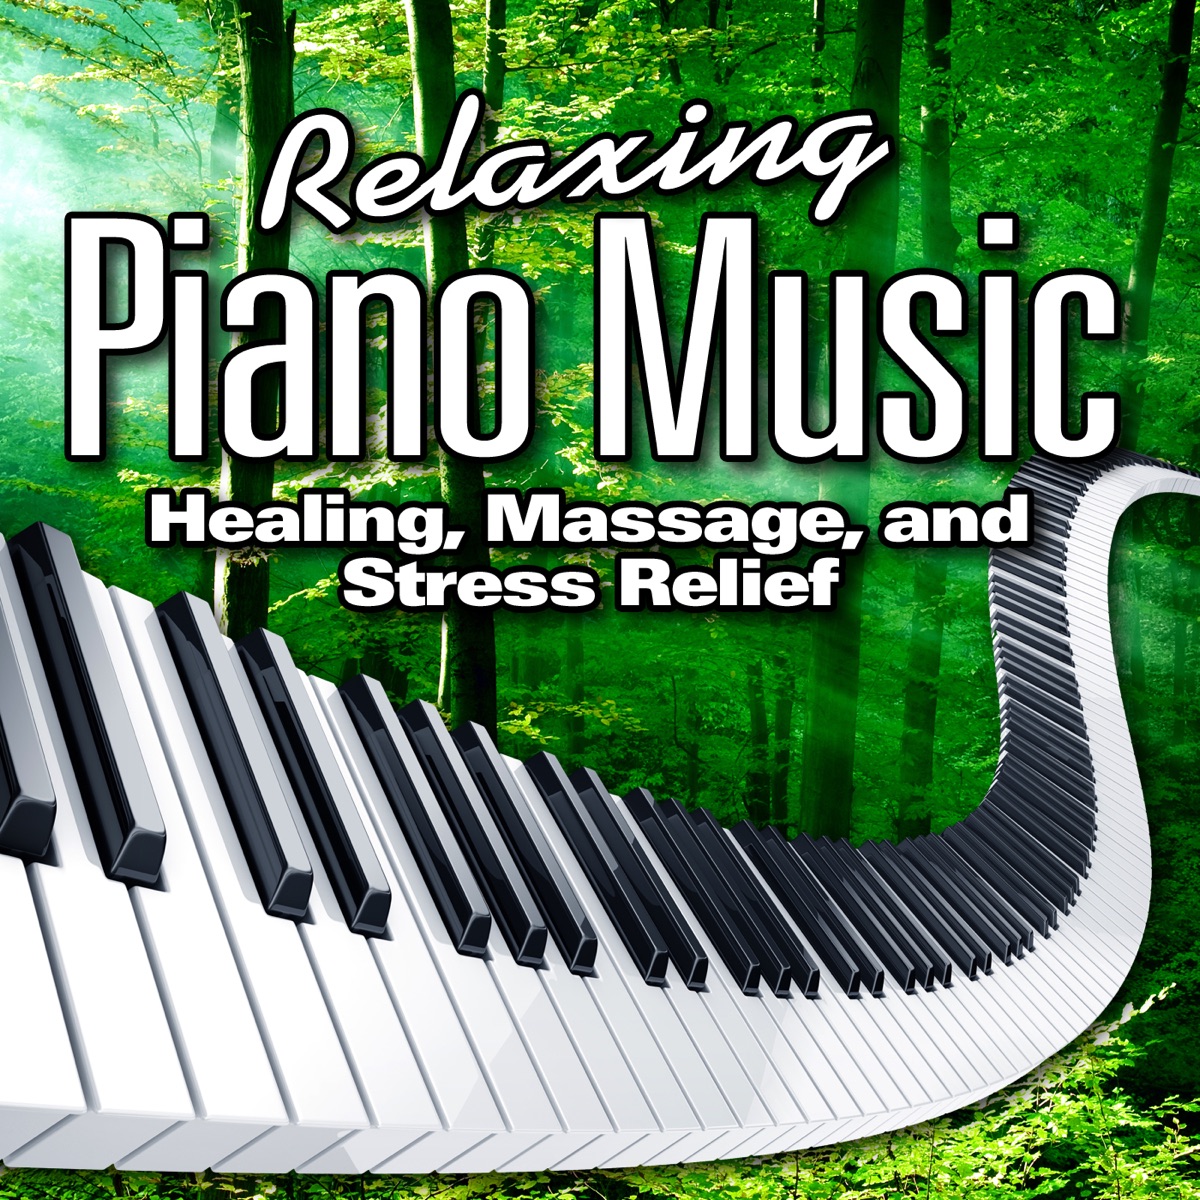 Relaxing Piano Music for Healing, Massage and Stress Relief by Relaxing  Piano Music on Apple Music